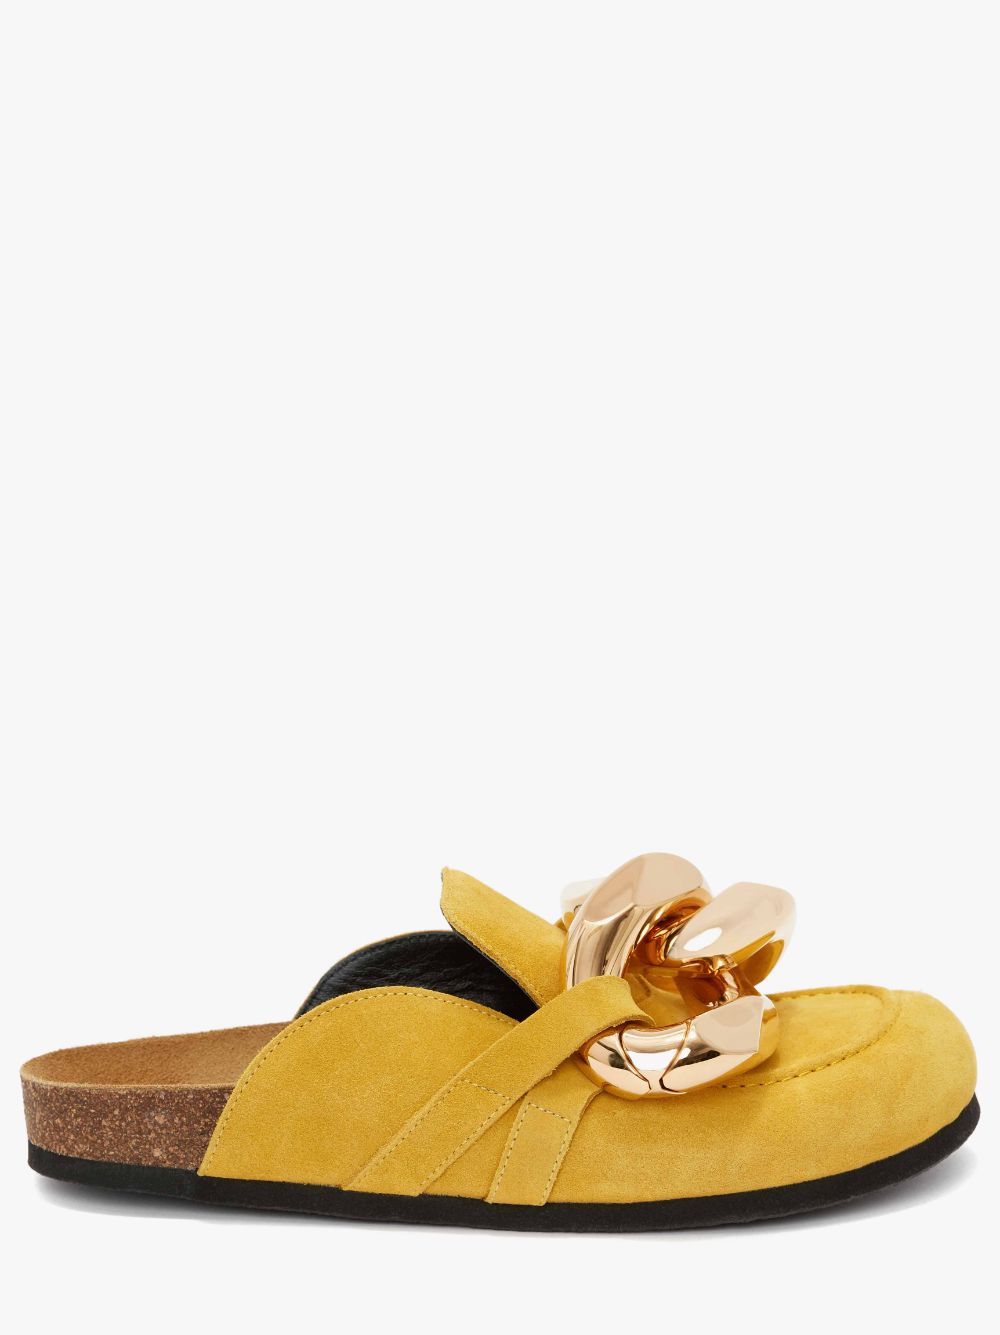 WOMEN'S SUEDE CHAIN LOAFER MULES in yellow | JW Anderson